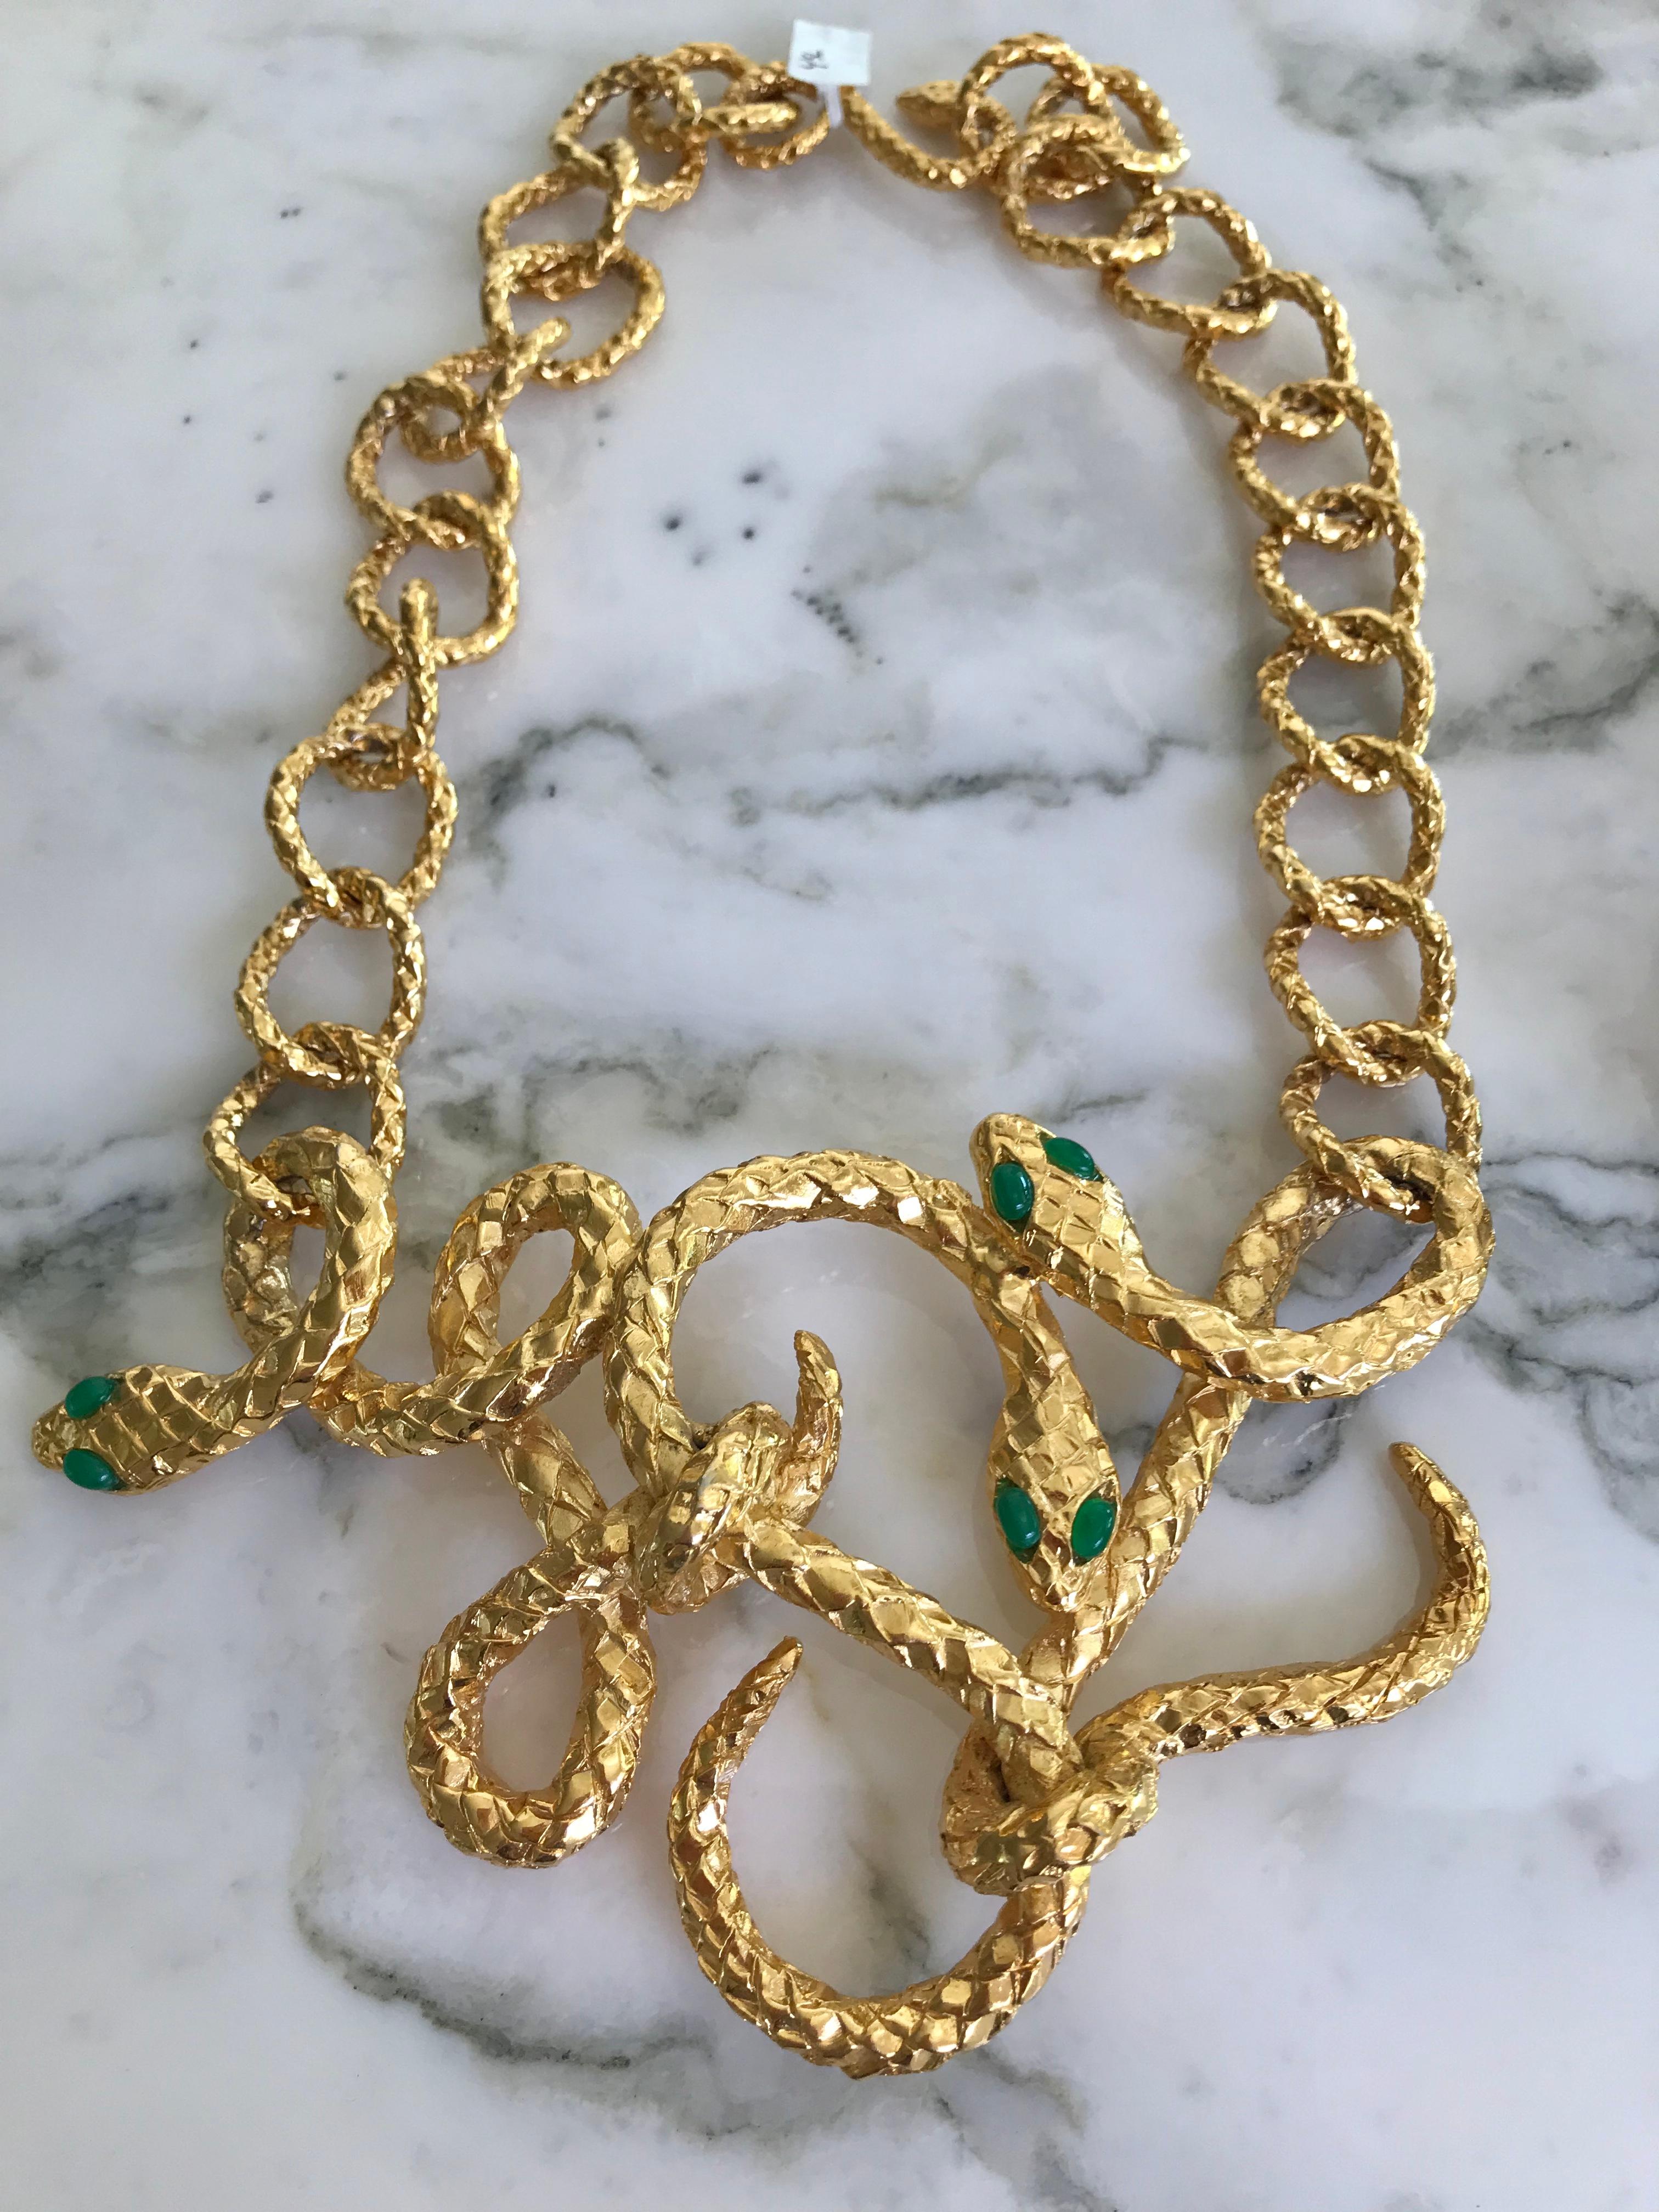 YSL Gold Plated Snake Gold plated chain link dramatic costume Jewelry necklace

* Yves Saint Laurent Cuff is sold separately 